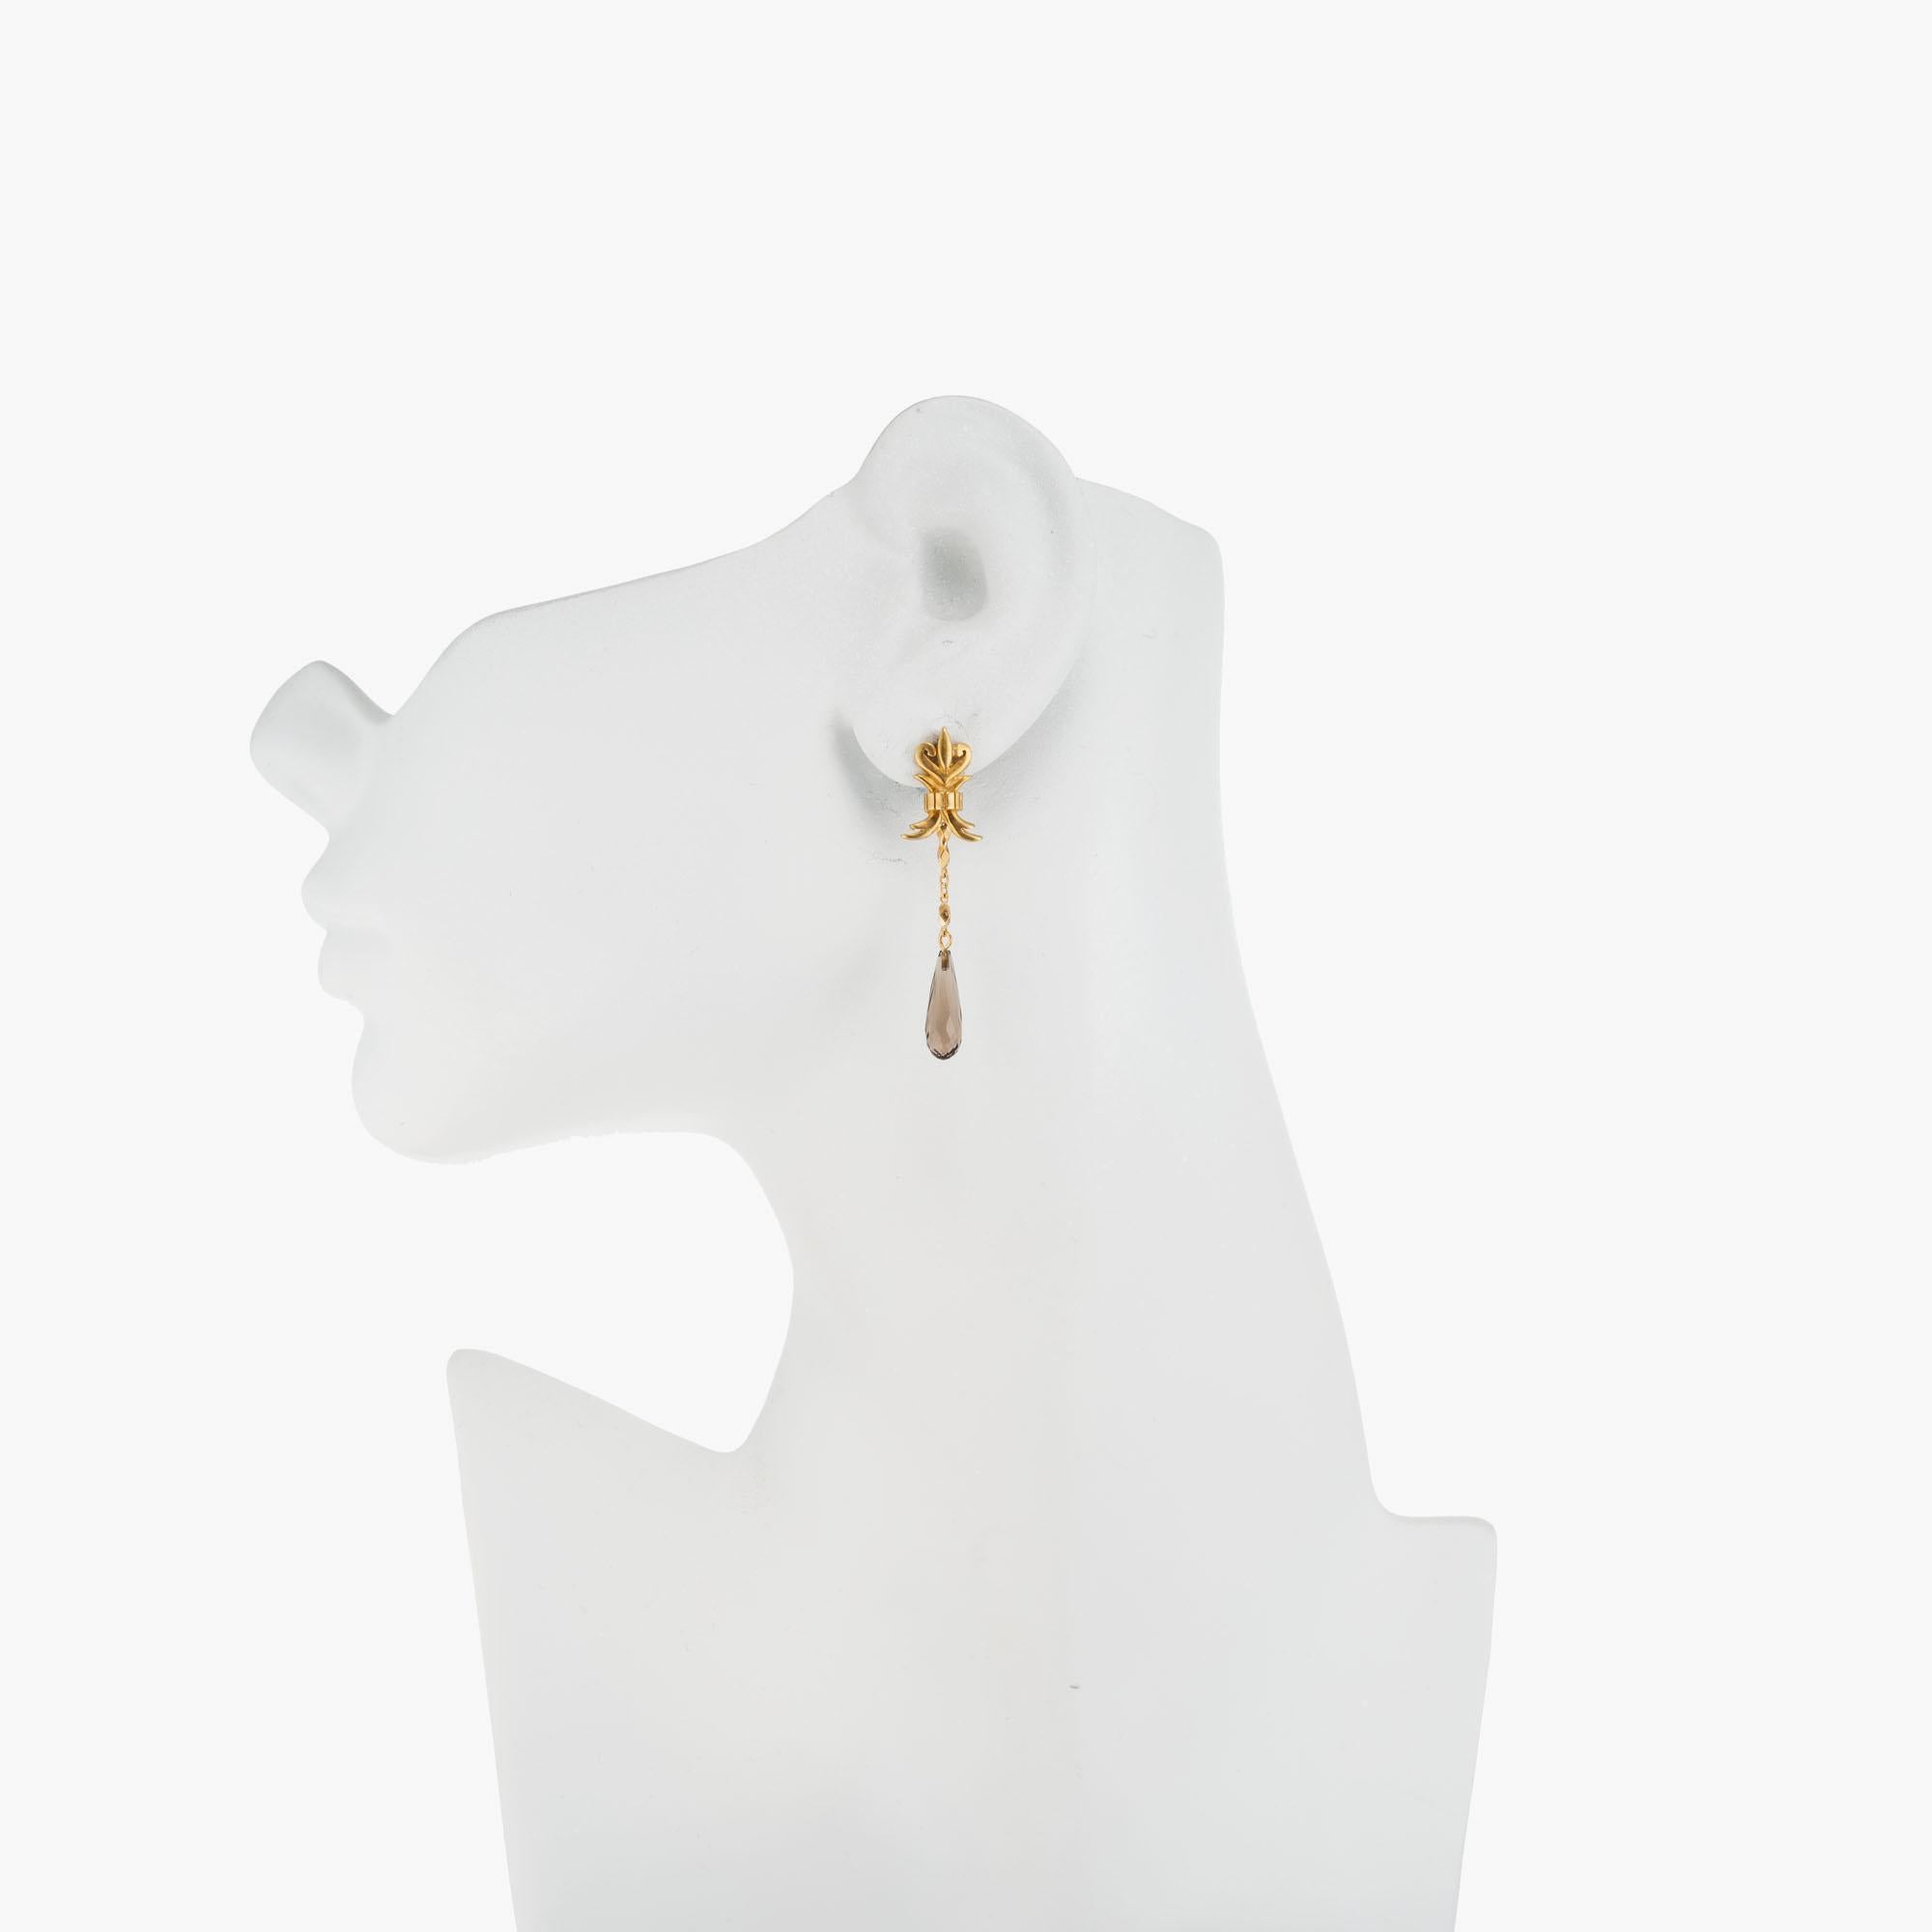 Robin Rotenier smoky quartz tear drop dangle earrings in 18k yellow gold.

2 briolette light dark brown smoky quartz approx. total weight: 3.5cts
18k yellow gold 
Stamped: 18k 750
Hallmark: RR
6.2 grams
Top to bottom: 48.3mm or 1 7/8 Inch
Width: